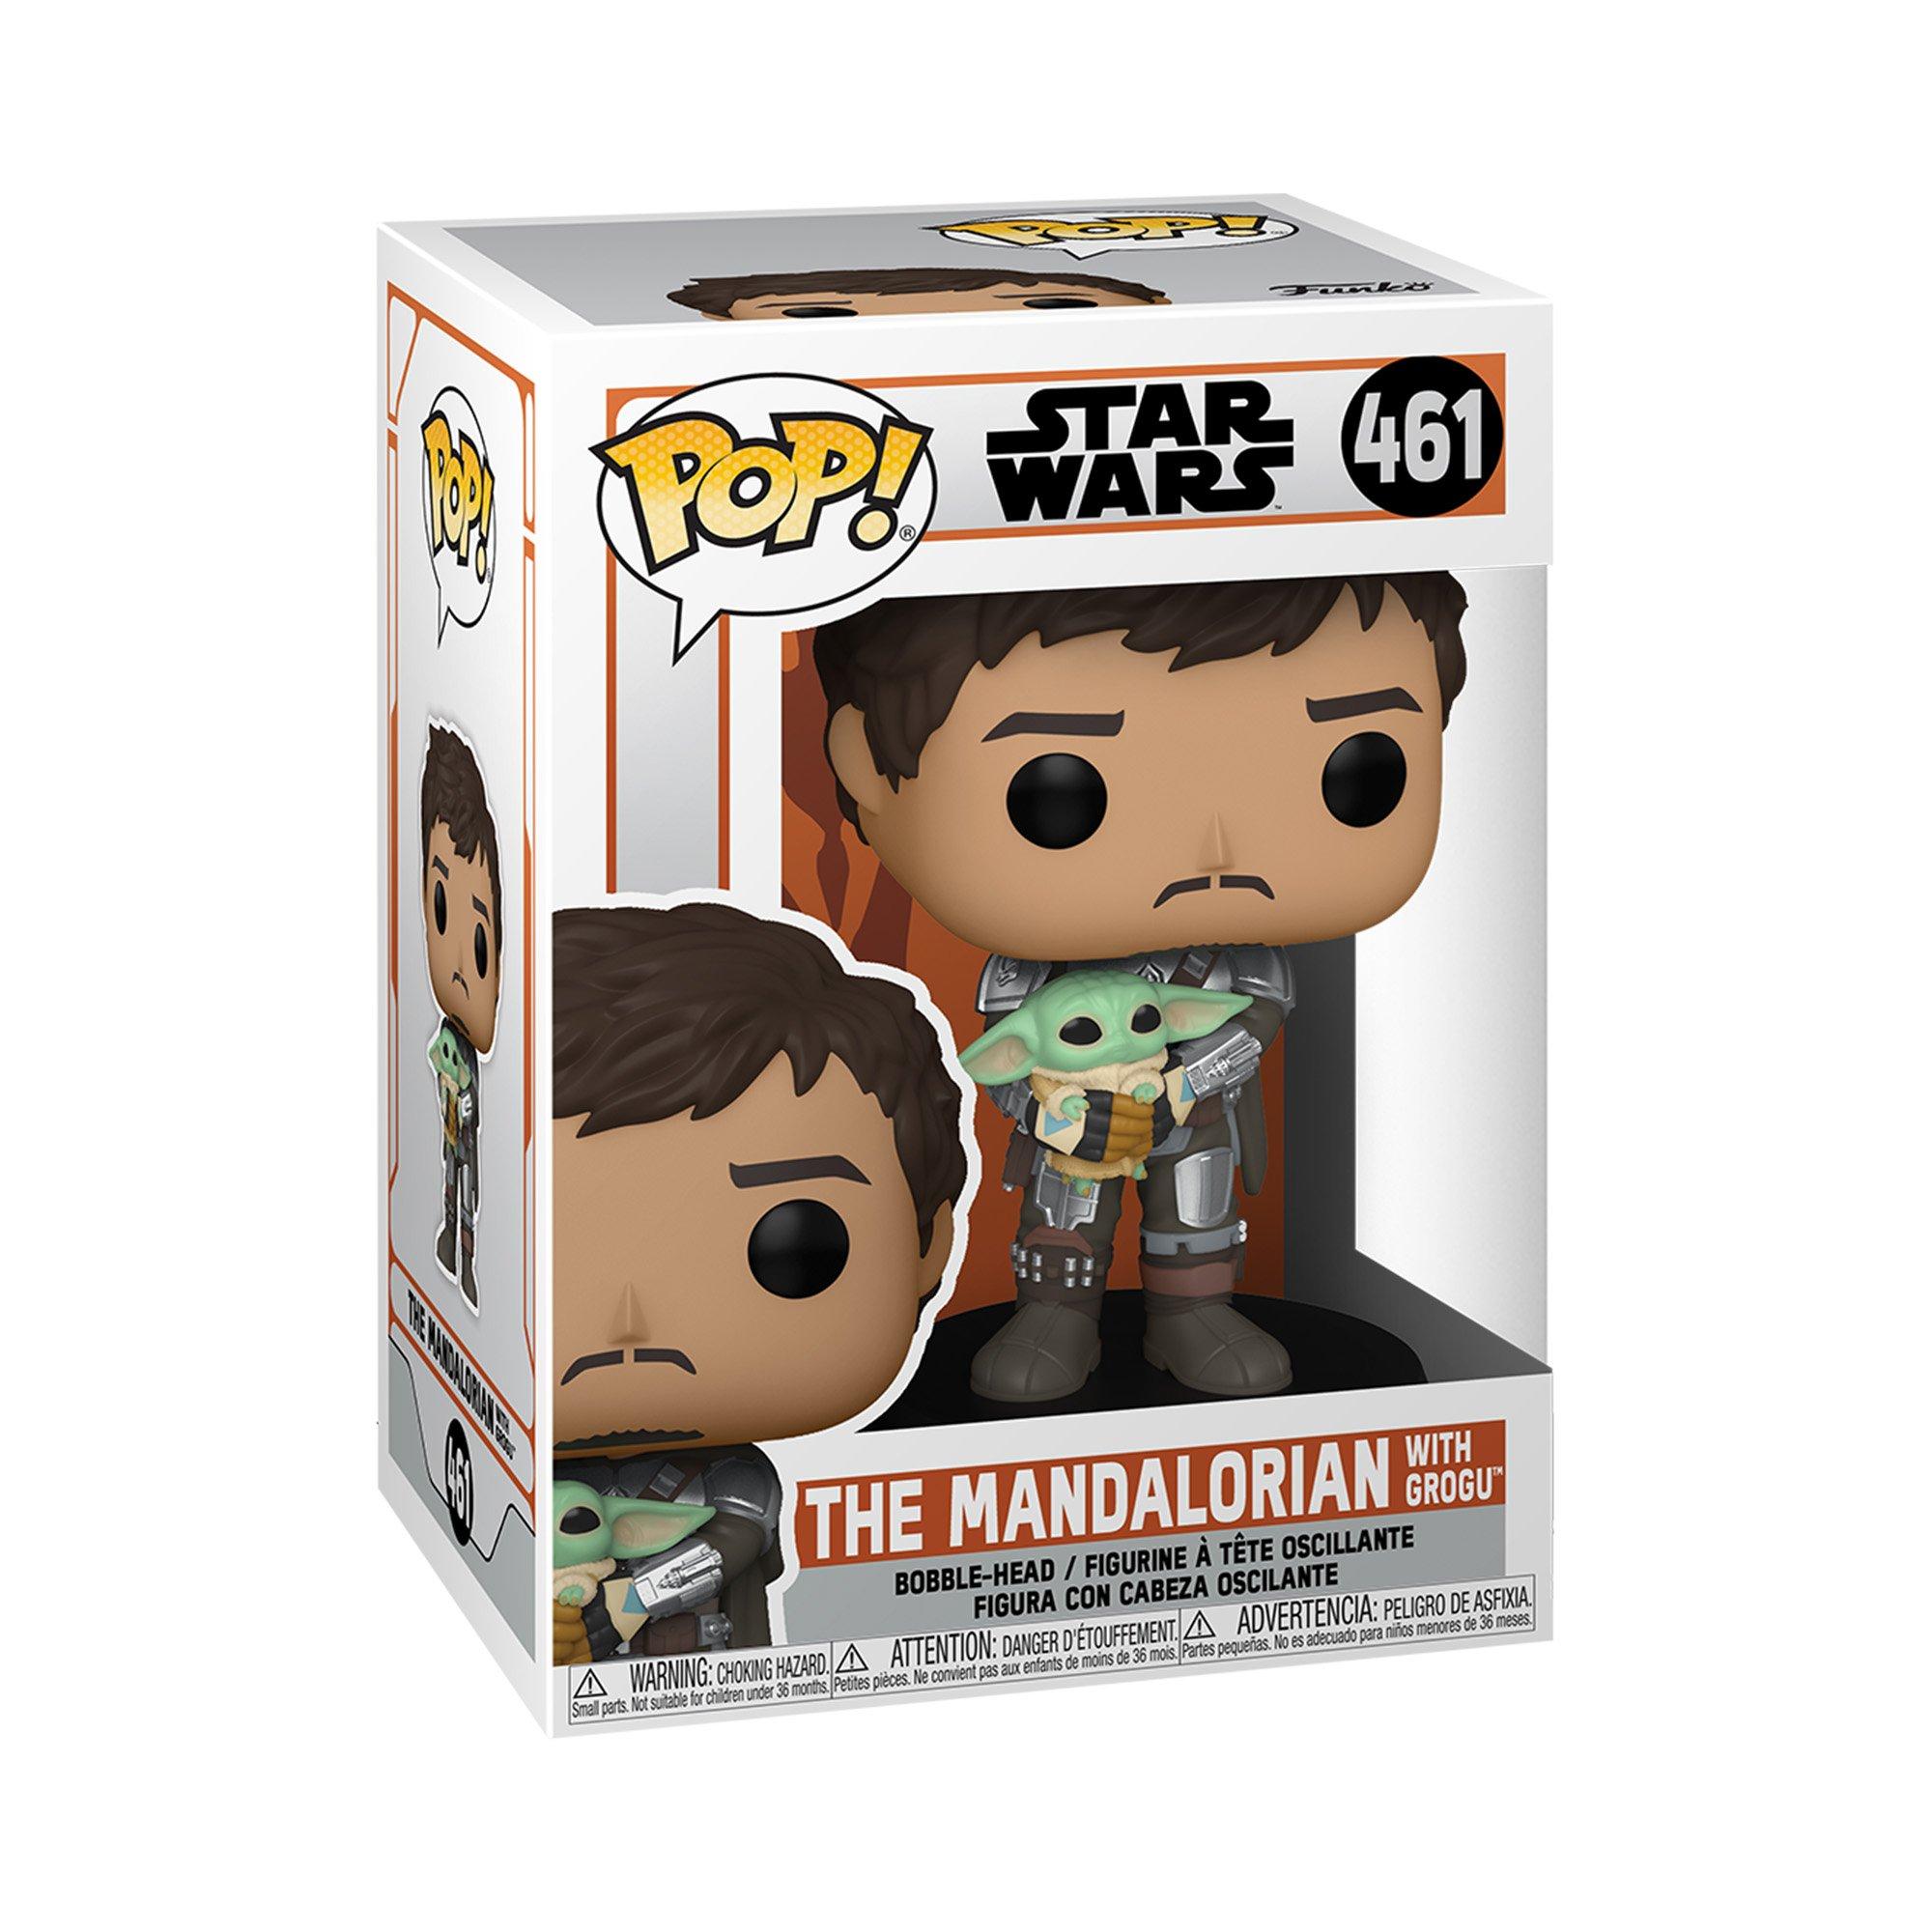 Funko POP! Star Wars: The Mandalorian Unmasked with The Child 4.75-in Bobblehead Vinyl Figure